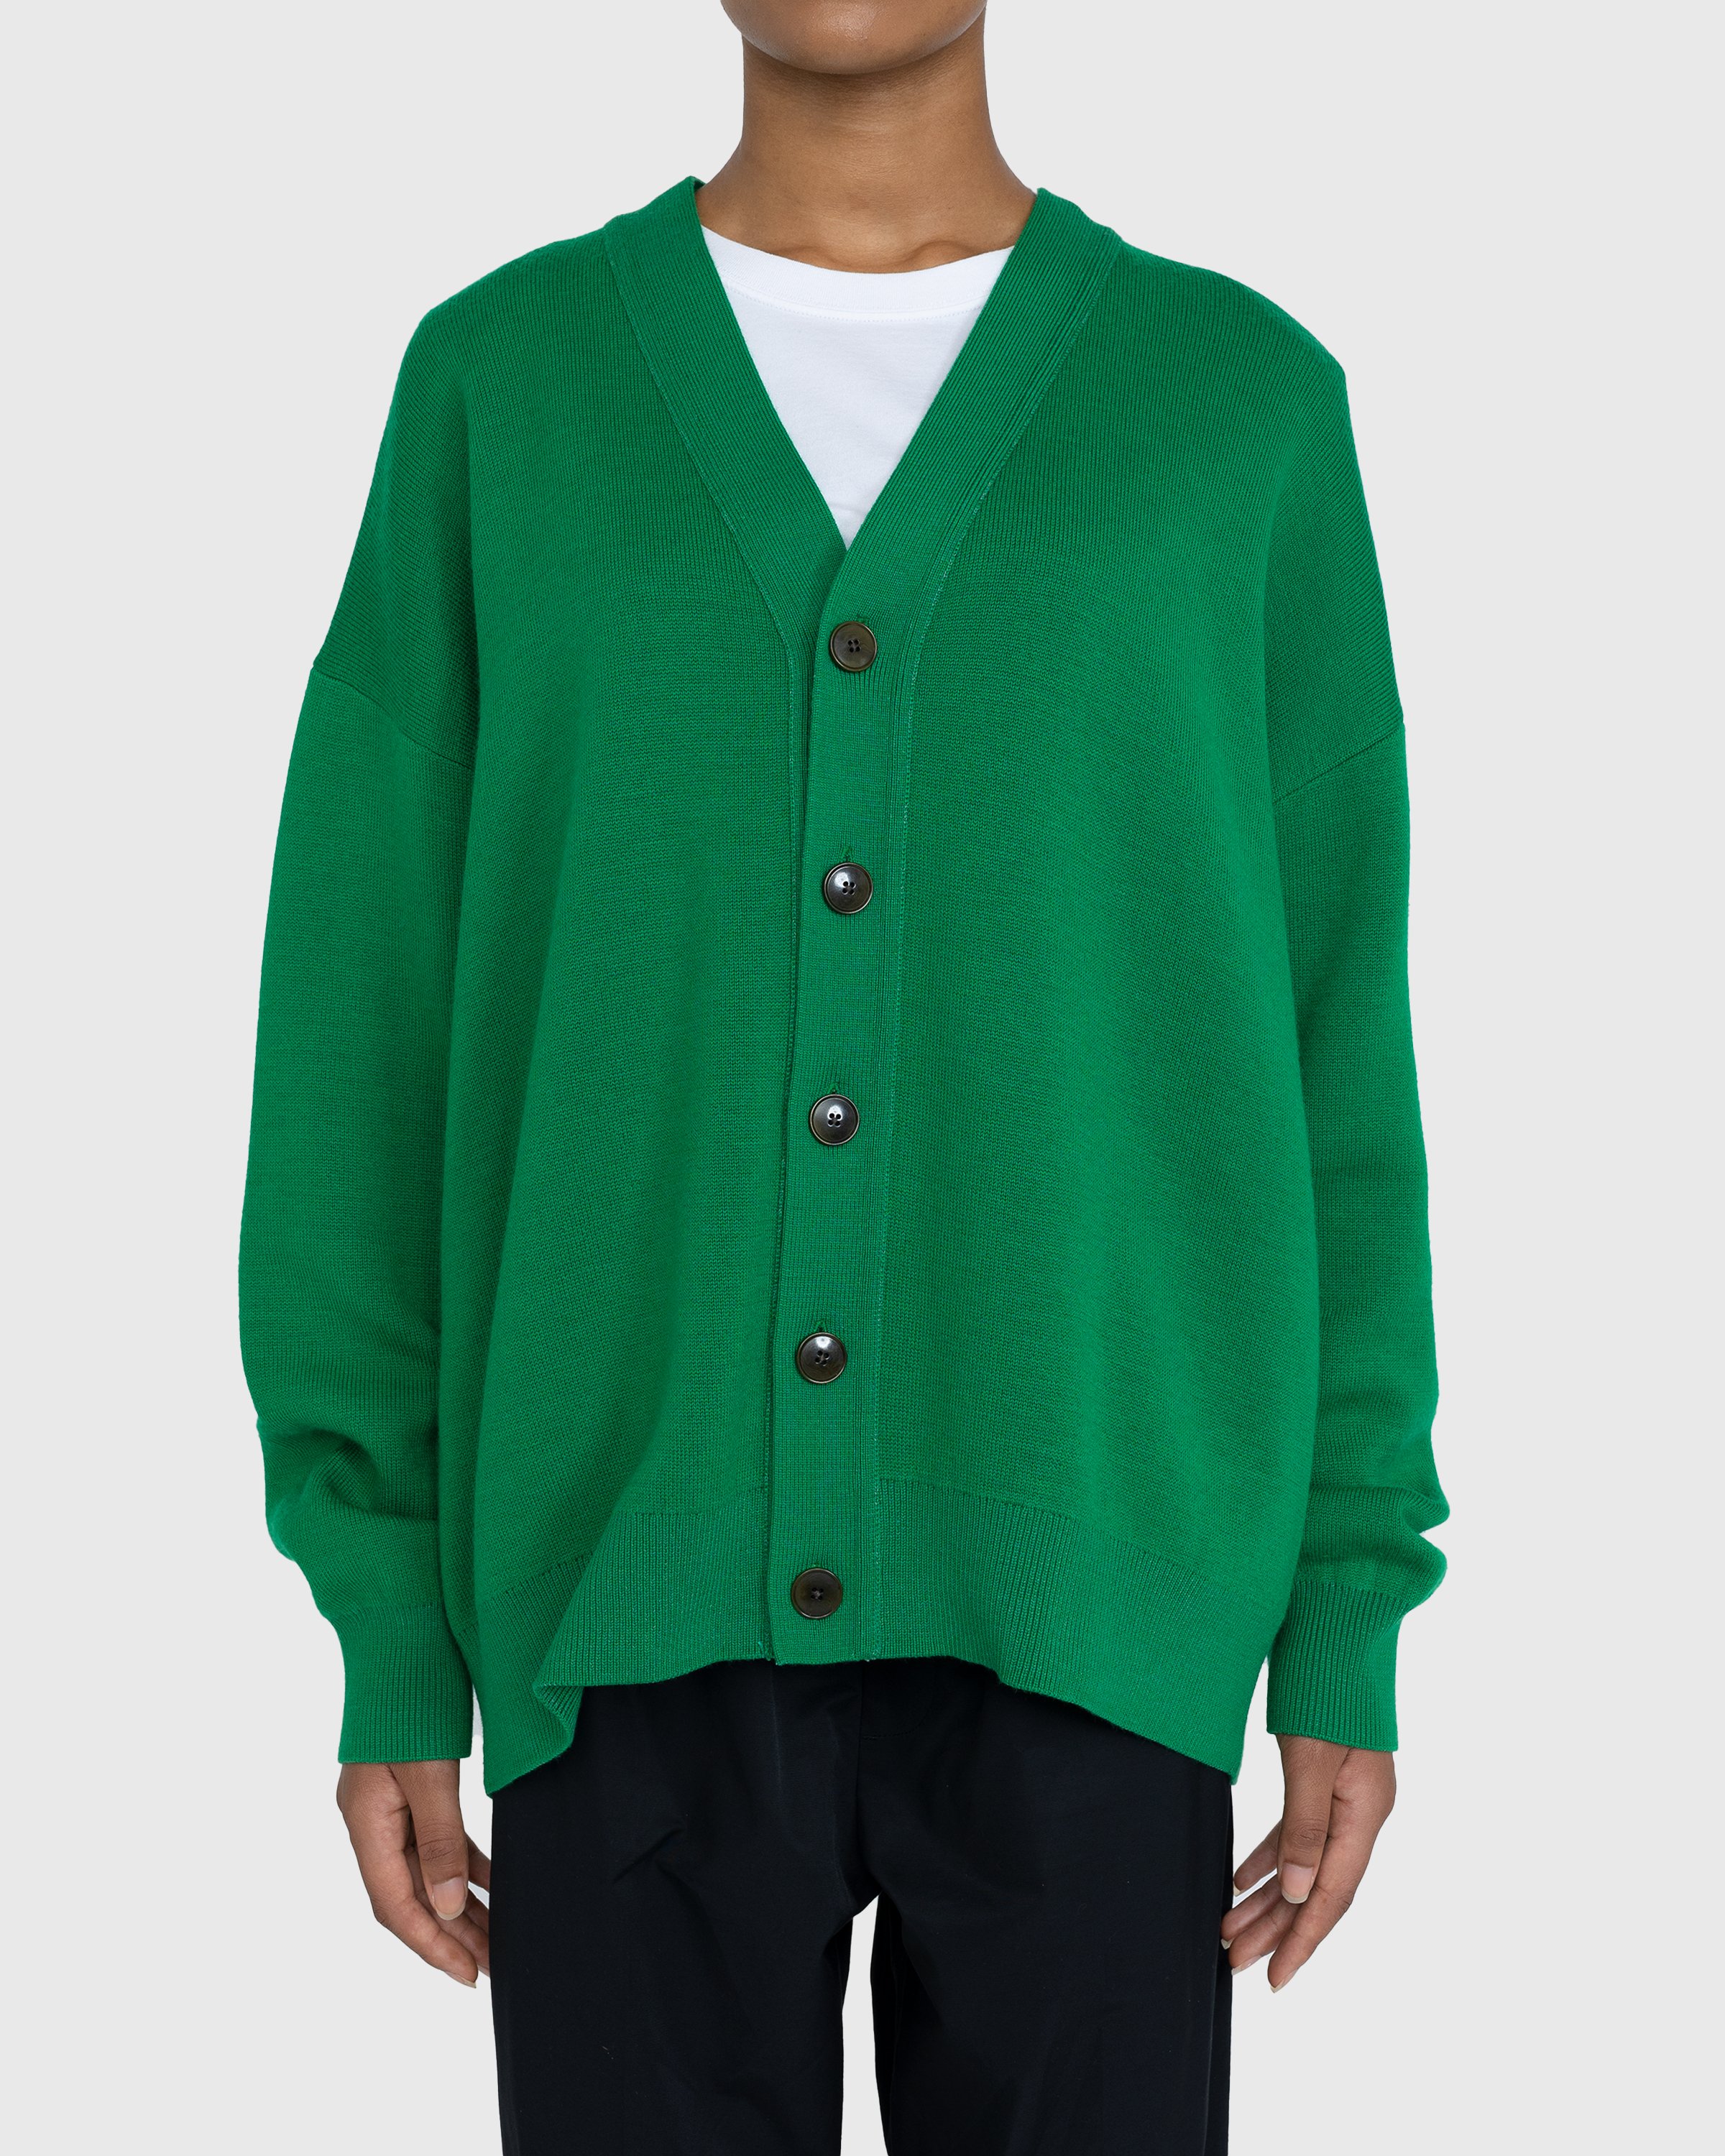 Acne Studios - Wool Blend V-Neck Cardigan Sweater Electric Green - Clothing - Green - Image 2